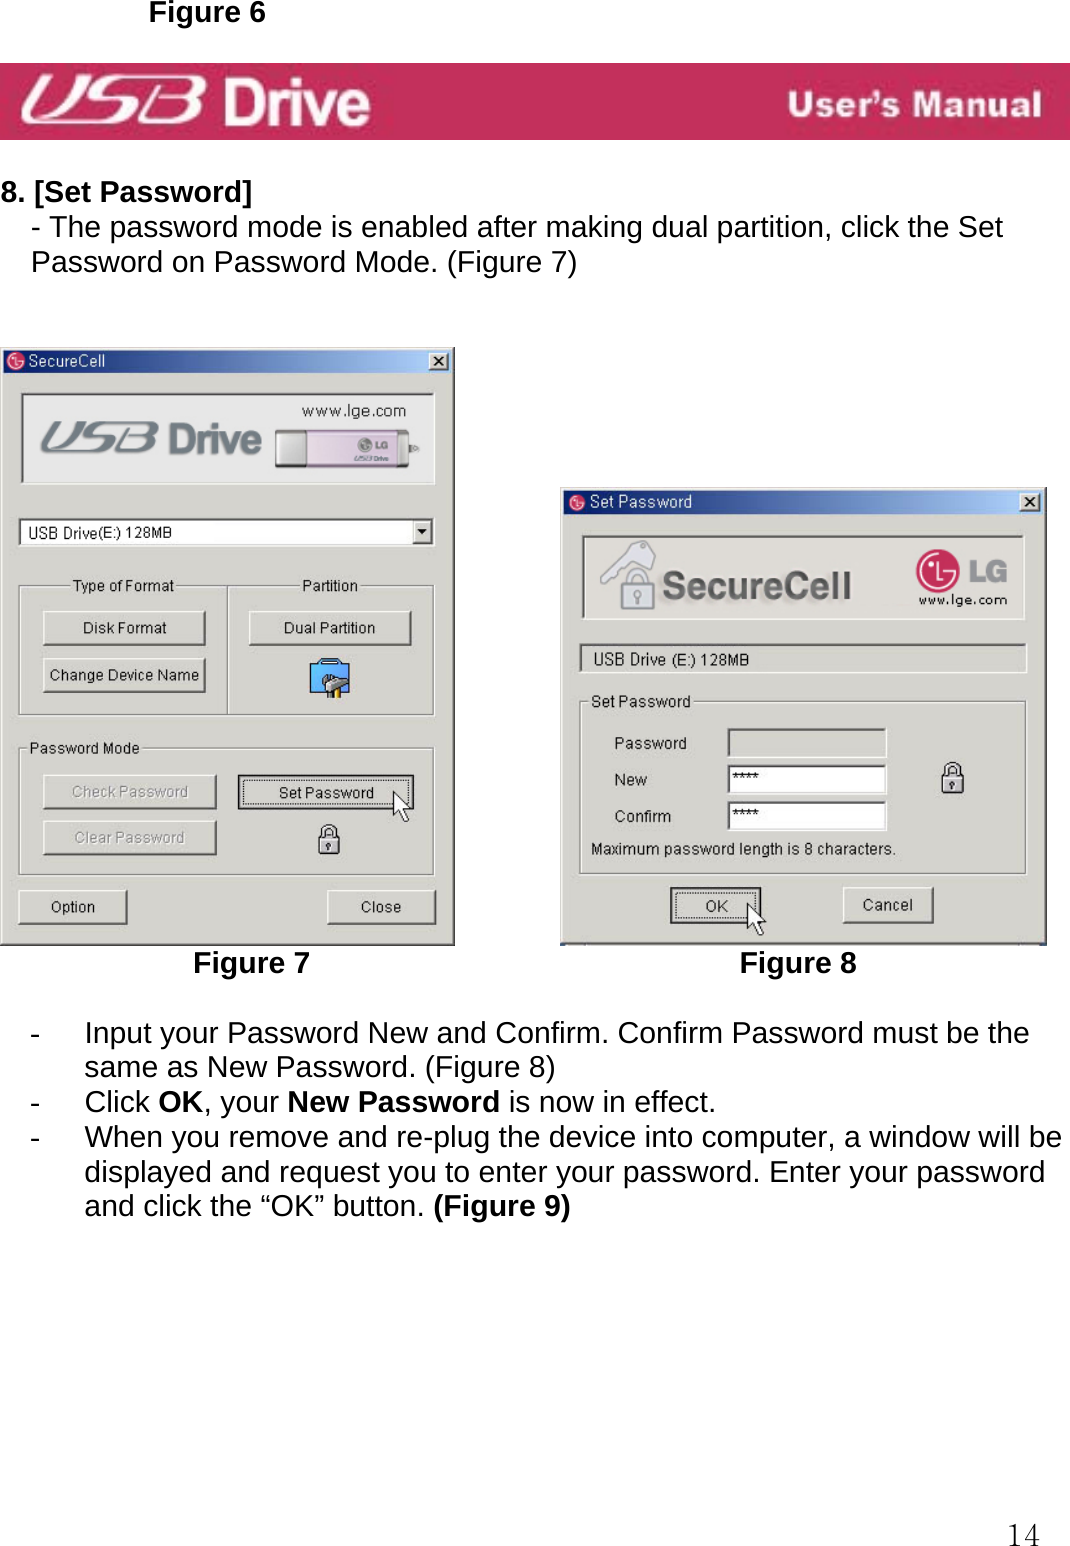  14          Figure 6    8. [Set Password]     - The password mode is enabled after making dual partition, click the Set Password on Password Mode. (Figure 7)                          Figure 7                             Figure 8  -  Input your Password New and Confirm. Confirm Password must be the same as New Password. (Figure 8) - Click OK, your New Password is now in effect. -  When you remove and re-plug the device into computer, a window will be displayed and request you to enter your password. Enter your password and click the “OK” button. (Figure 9)        